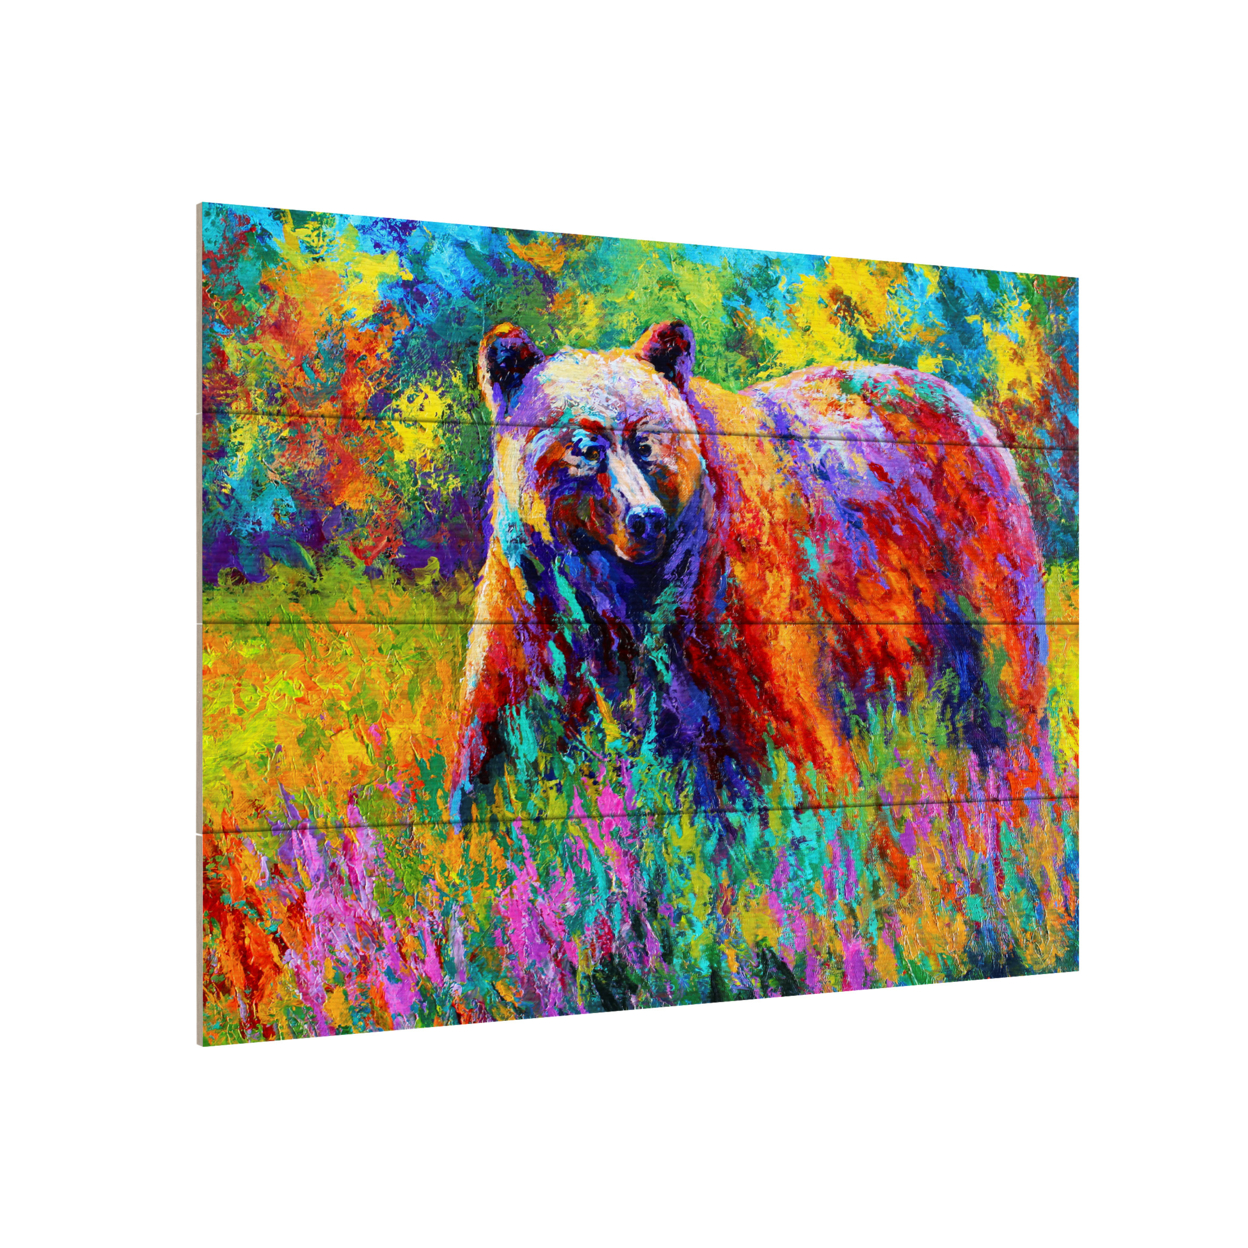 Wall Art 12 X 16 Inches Titled Grizz On Guard Ready To Hang Printed On Wooden Planks